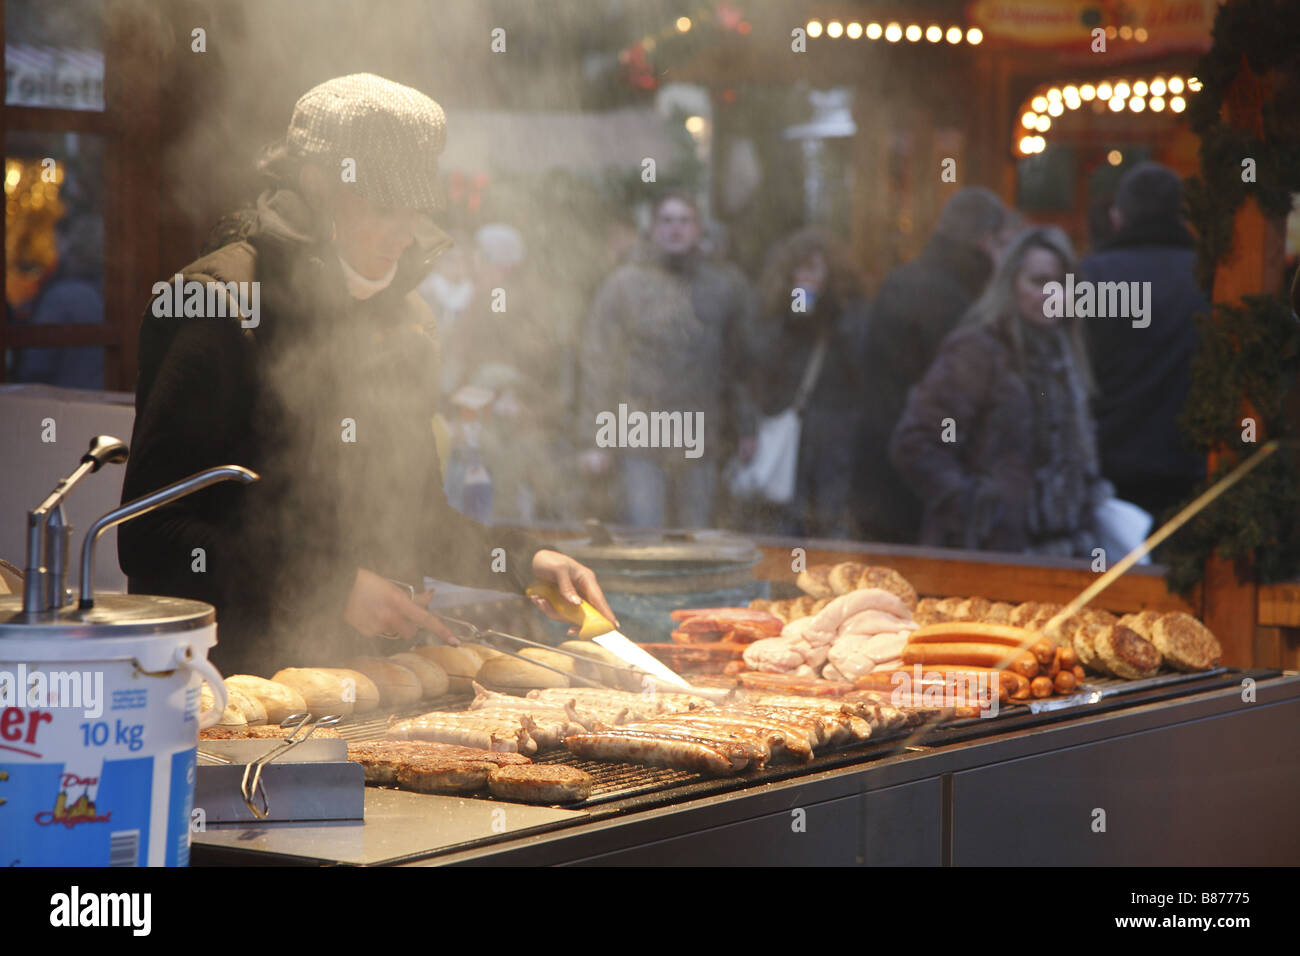 Berlin Rotes Rathaus Red Town Hall Weihnachtsmarkt Christmas Market Bratwurst Stand Fried Sausage Stock Photo